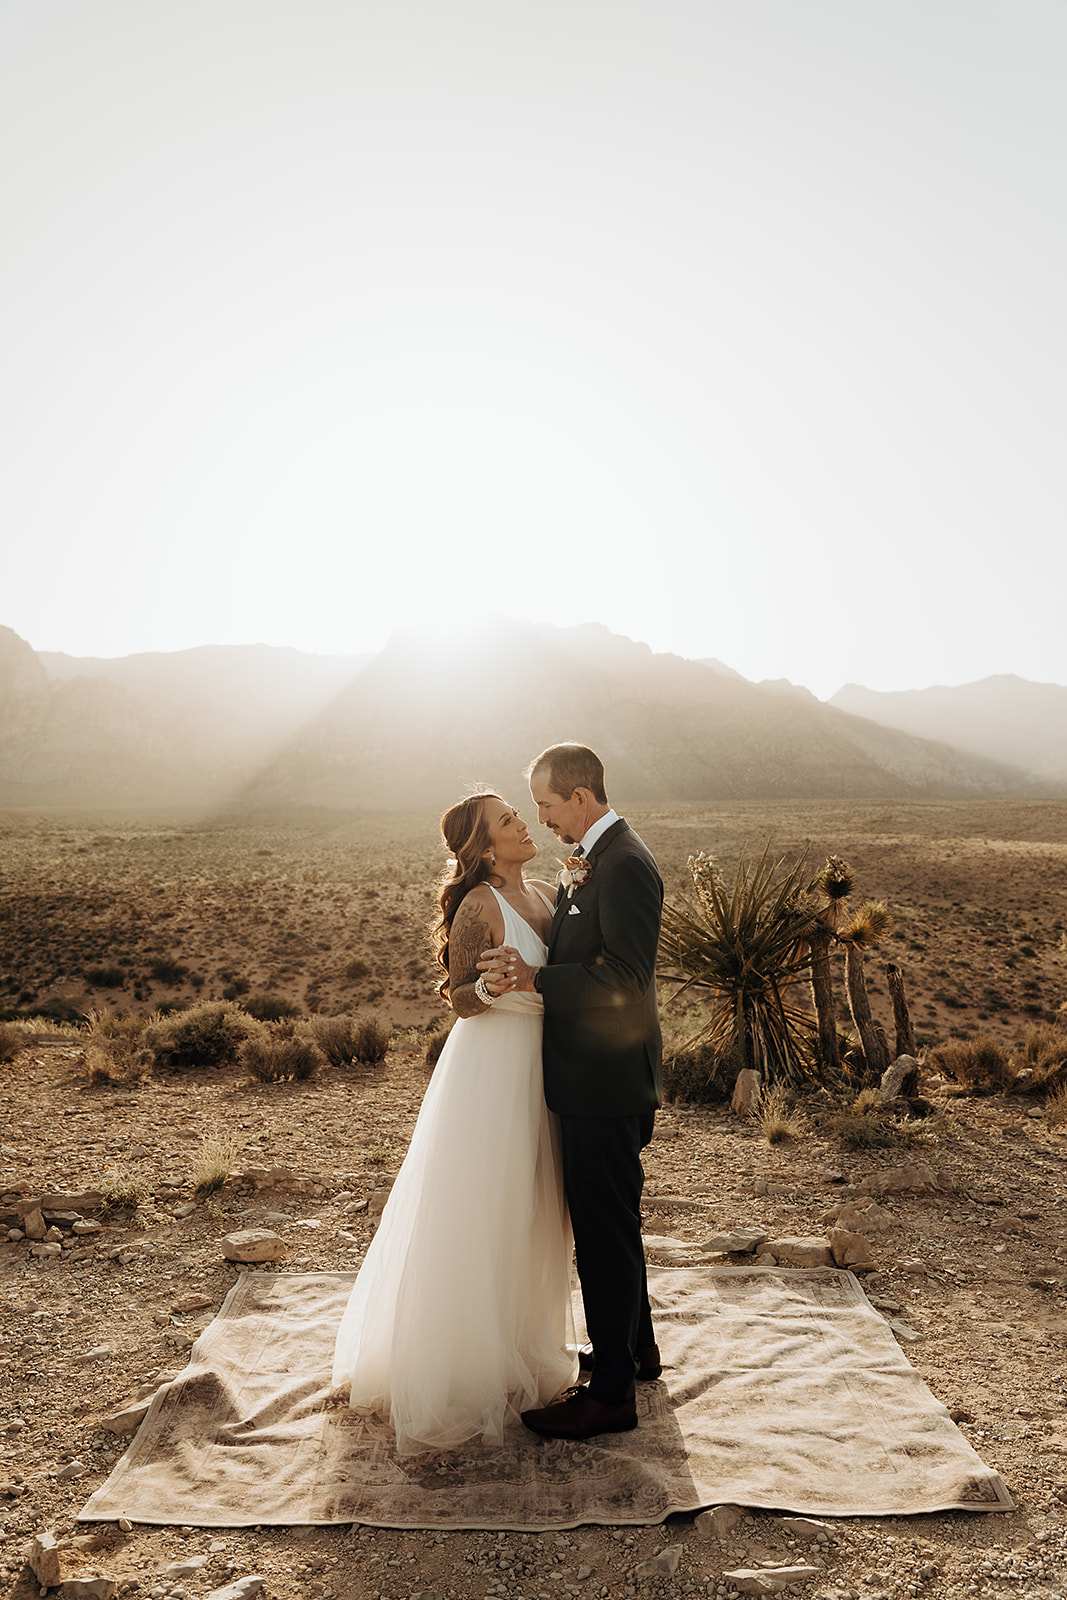 Bride and groom sharing an embrace during their Cactus Joe's elopement shoot